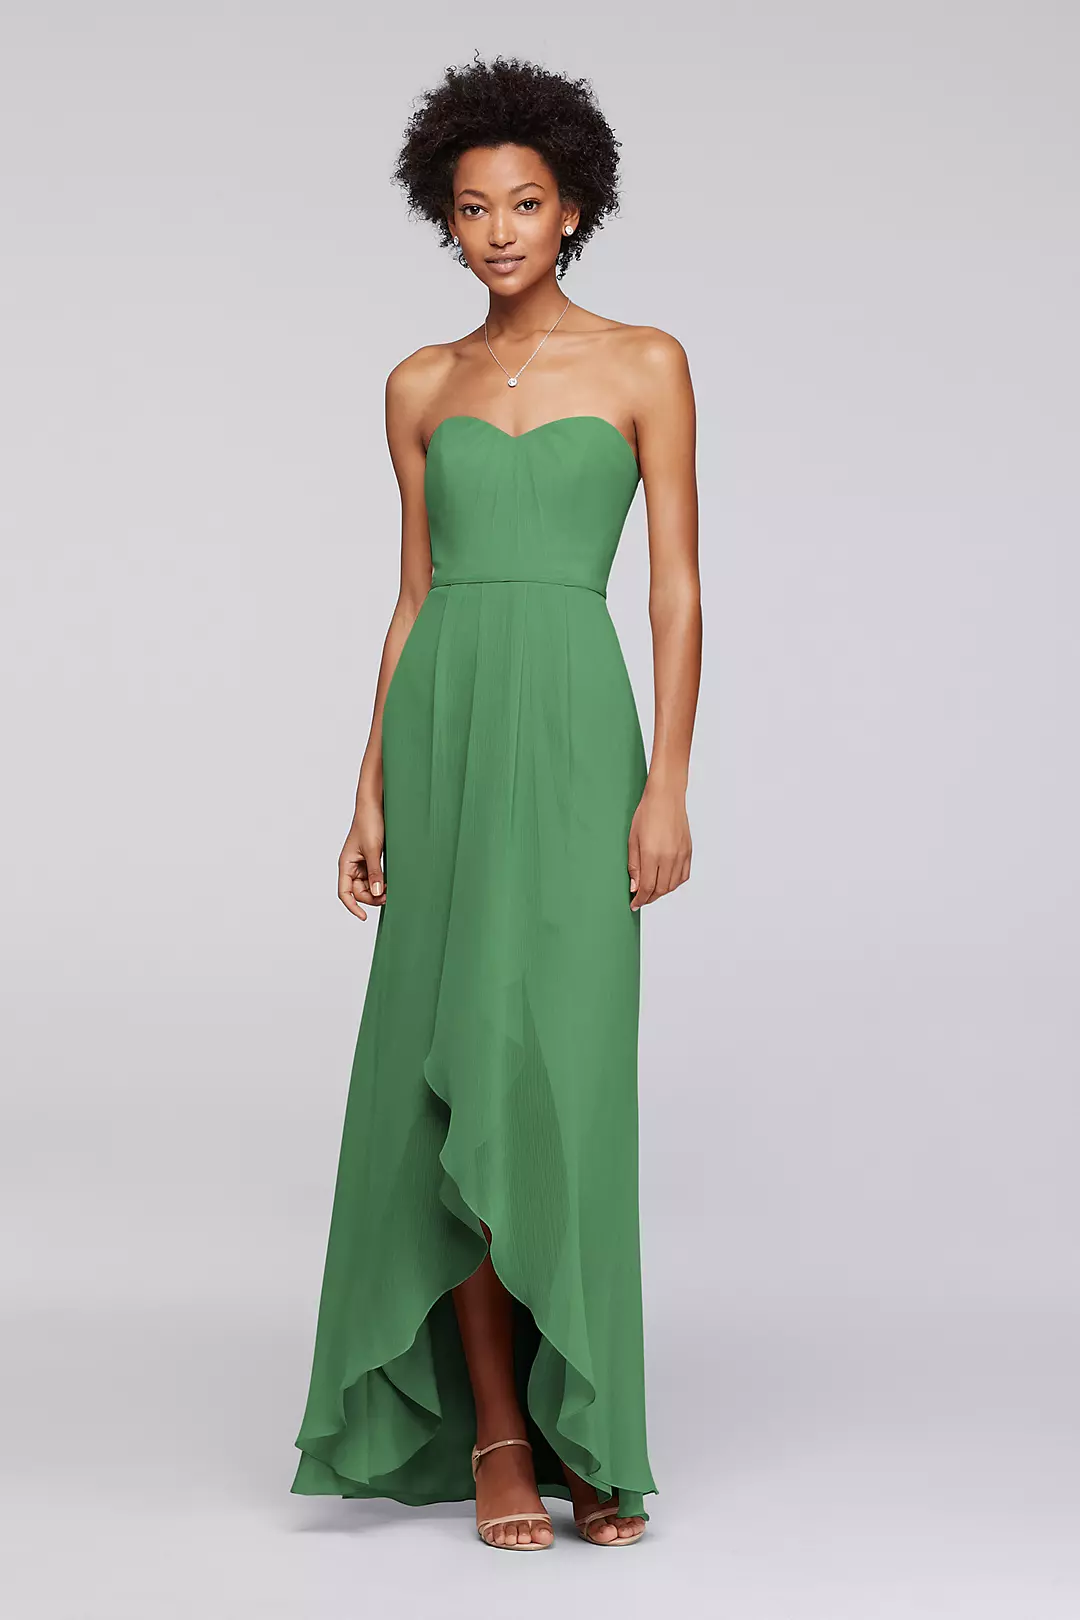 Strapless Bridesmaid Dress with High-Low Hem Image